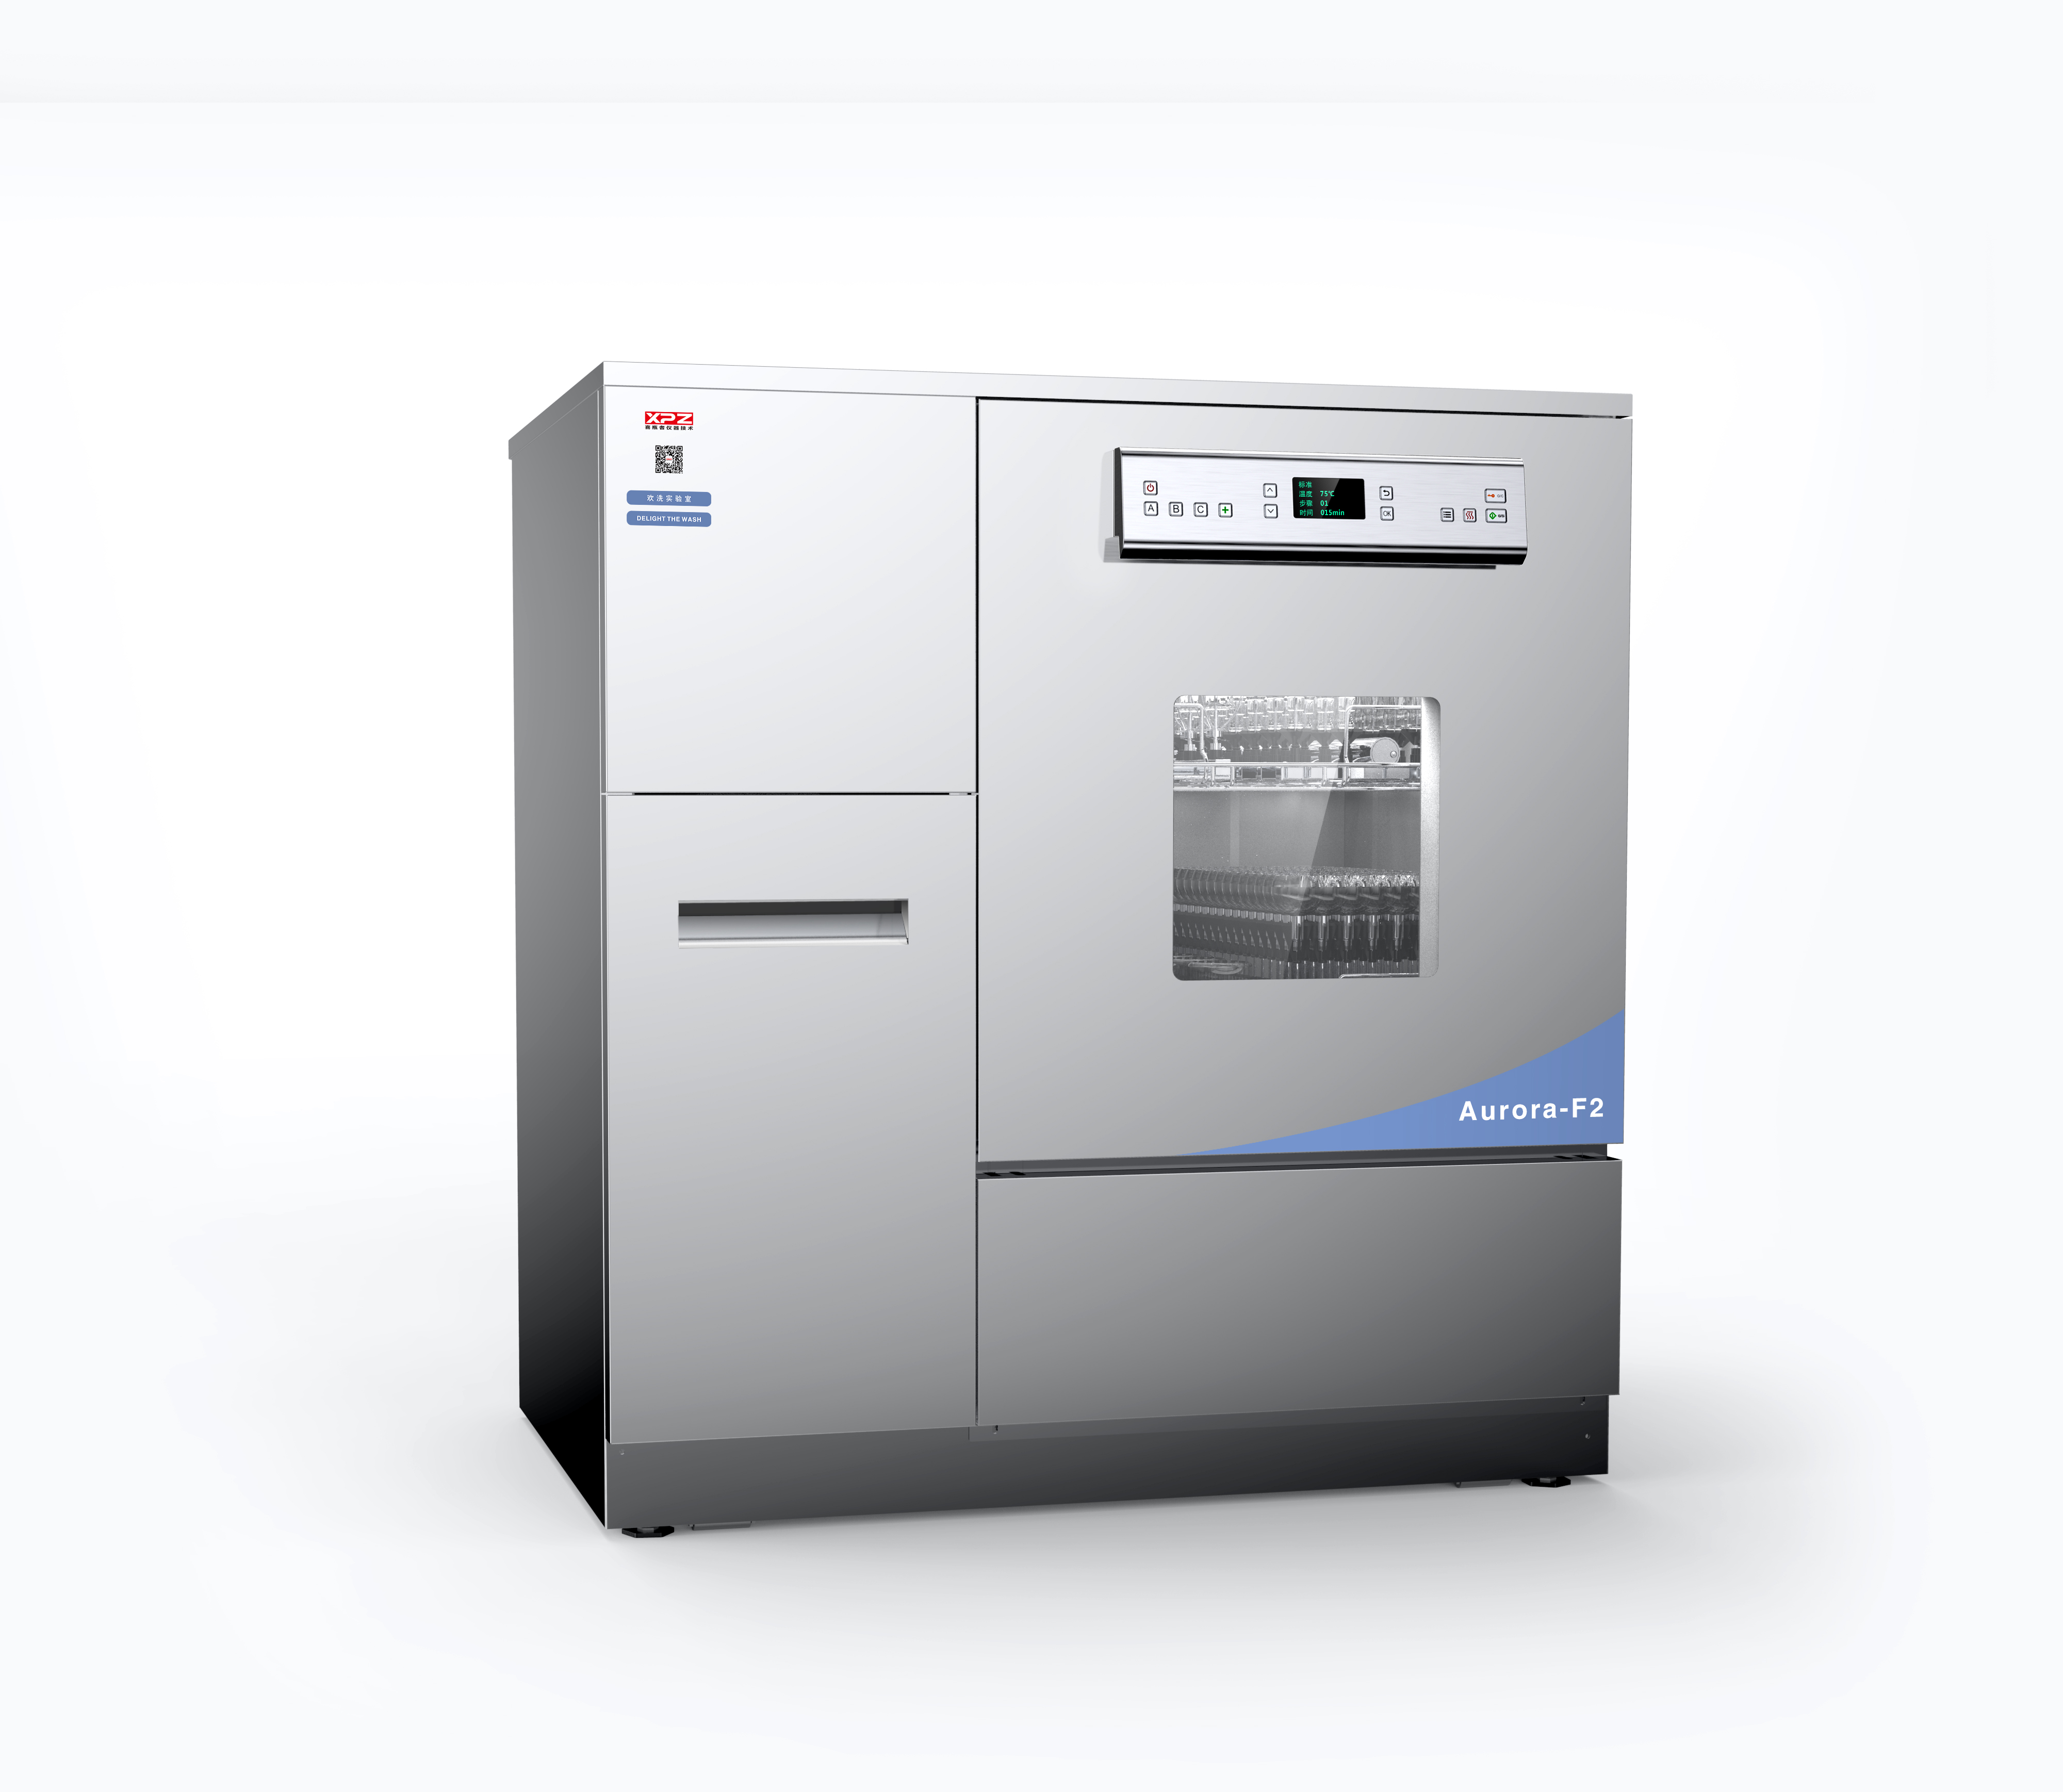 2020 New Style Miele Washing Disinfector - Laboratory Glassware Washing Machine with in-Situ Drying Function Dedicated to Cleaning All Kinds of Volumetric Bottles, Measuring Bottles, and Other Gla...